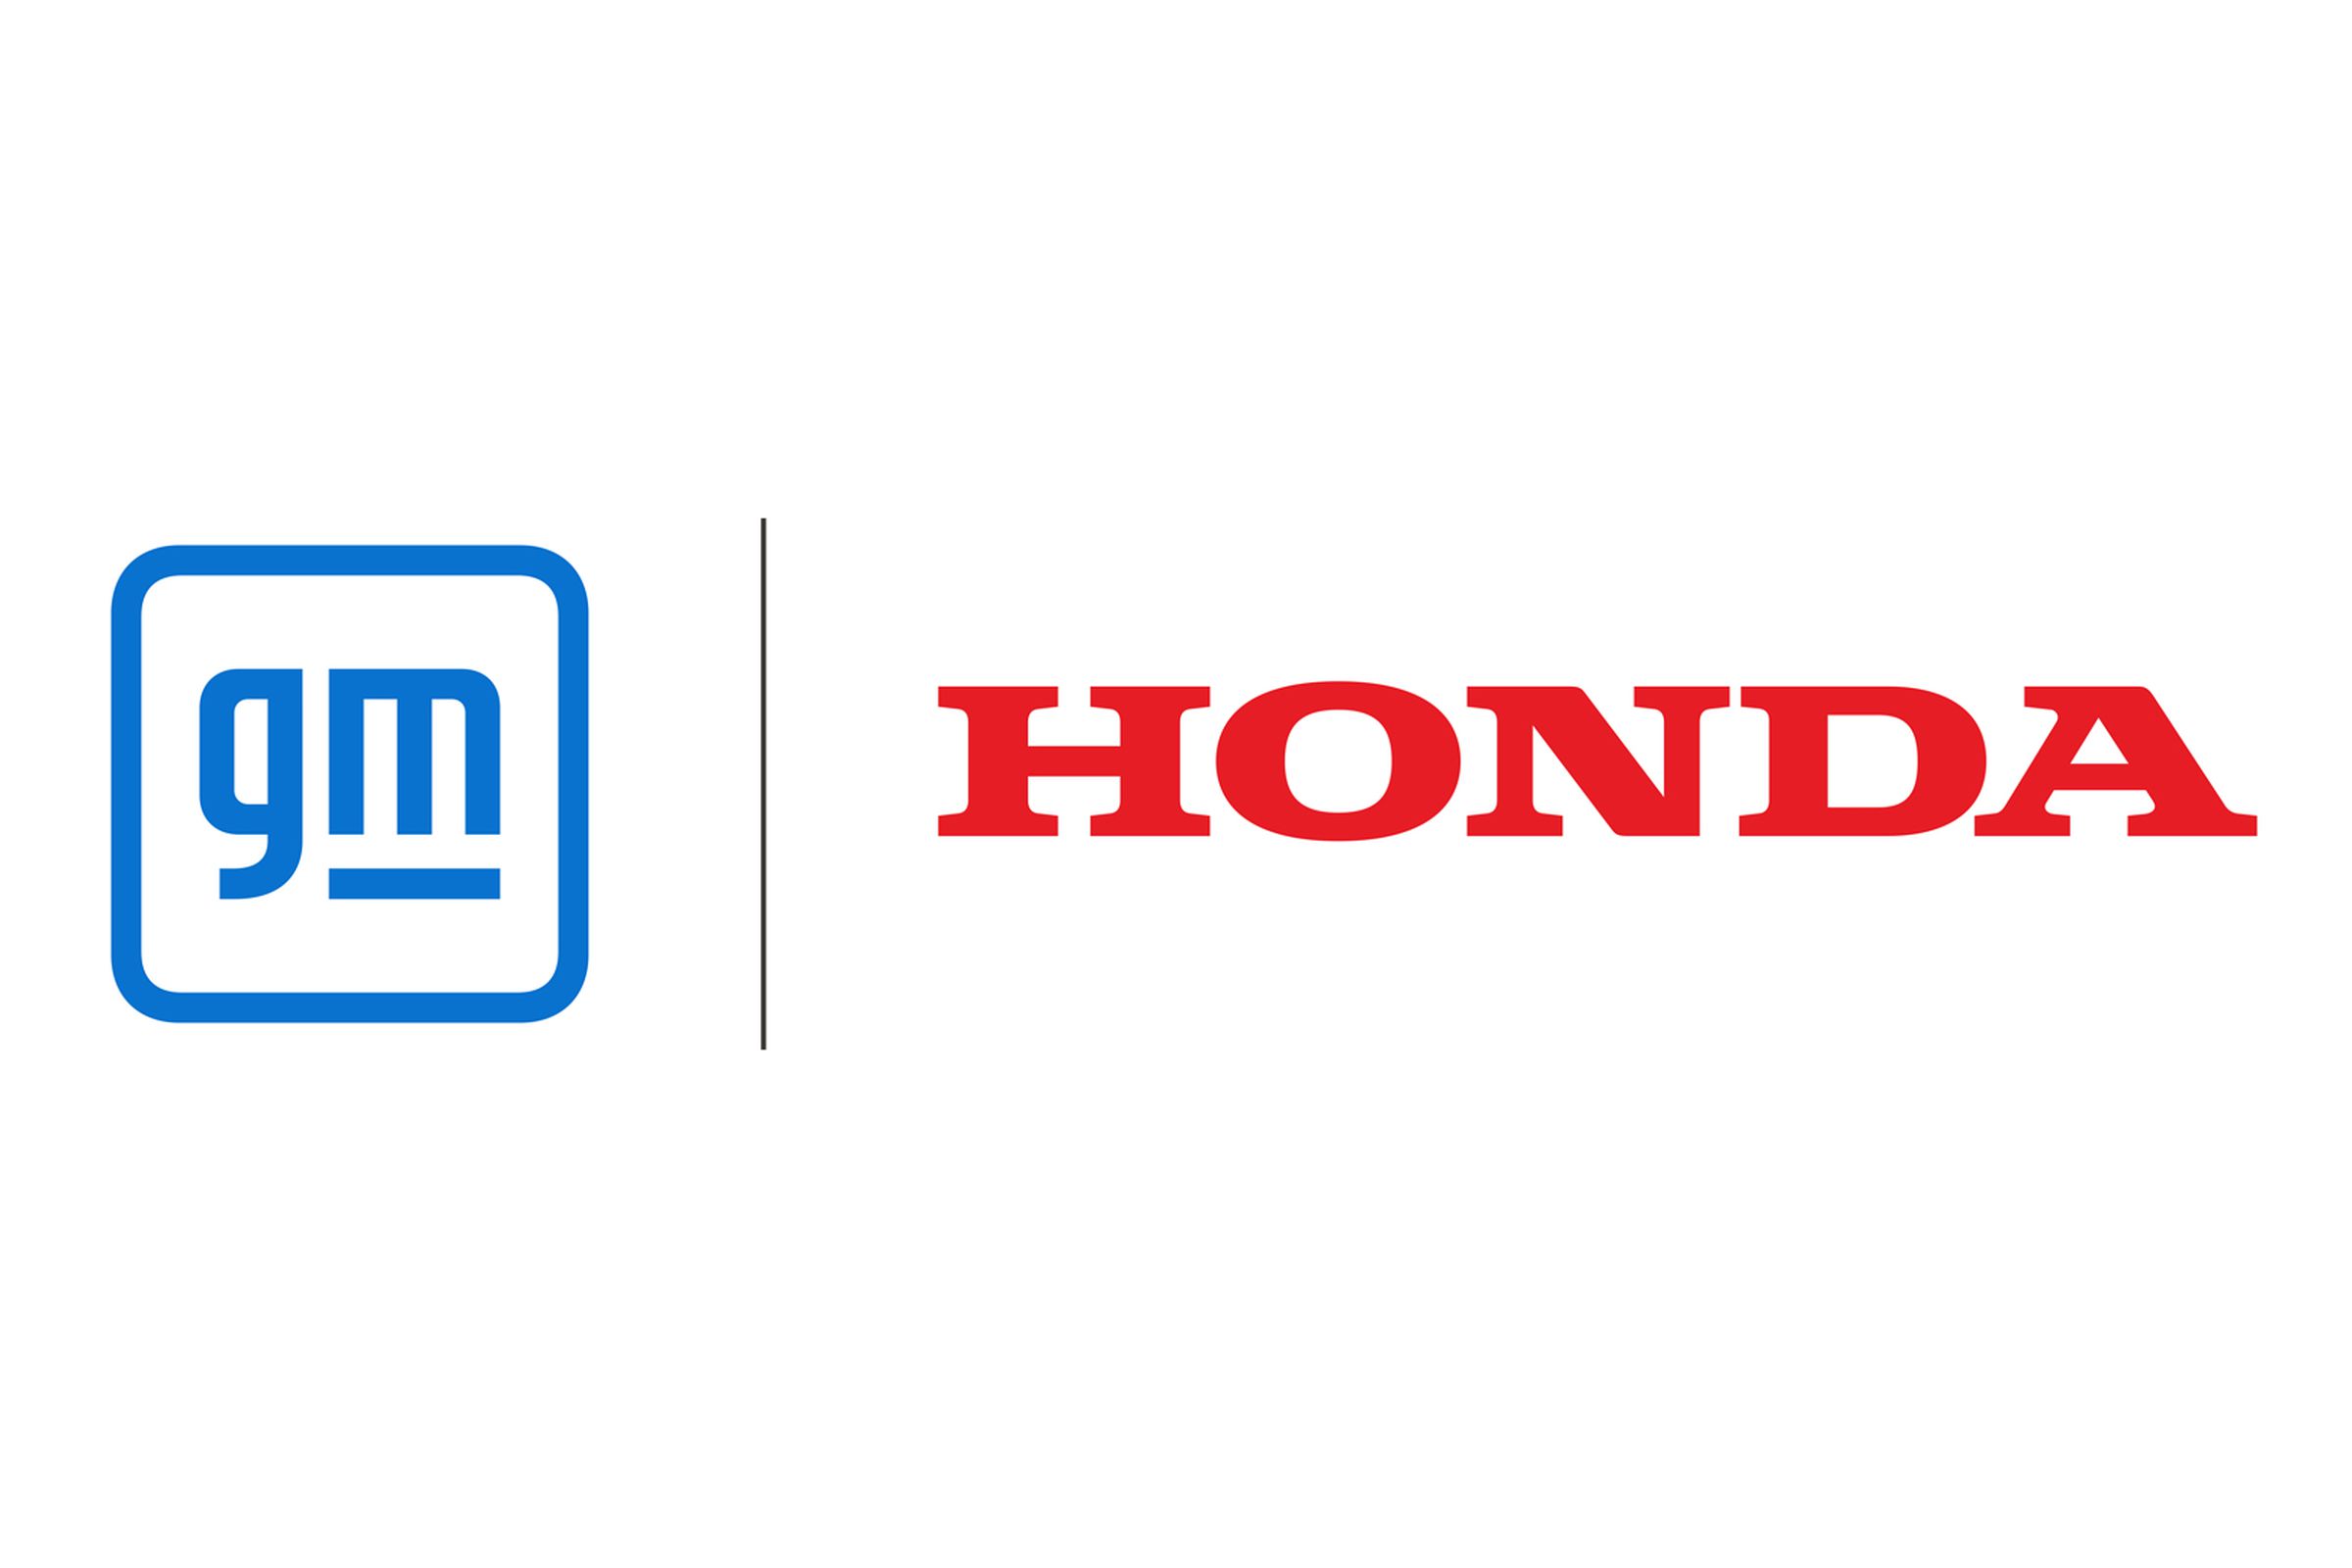 GM and Honda logos side by side